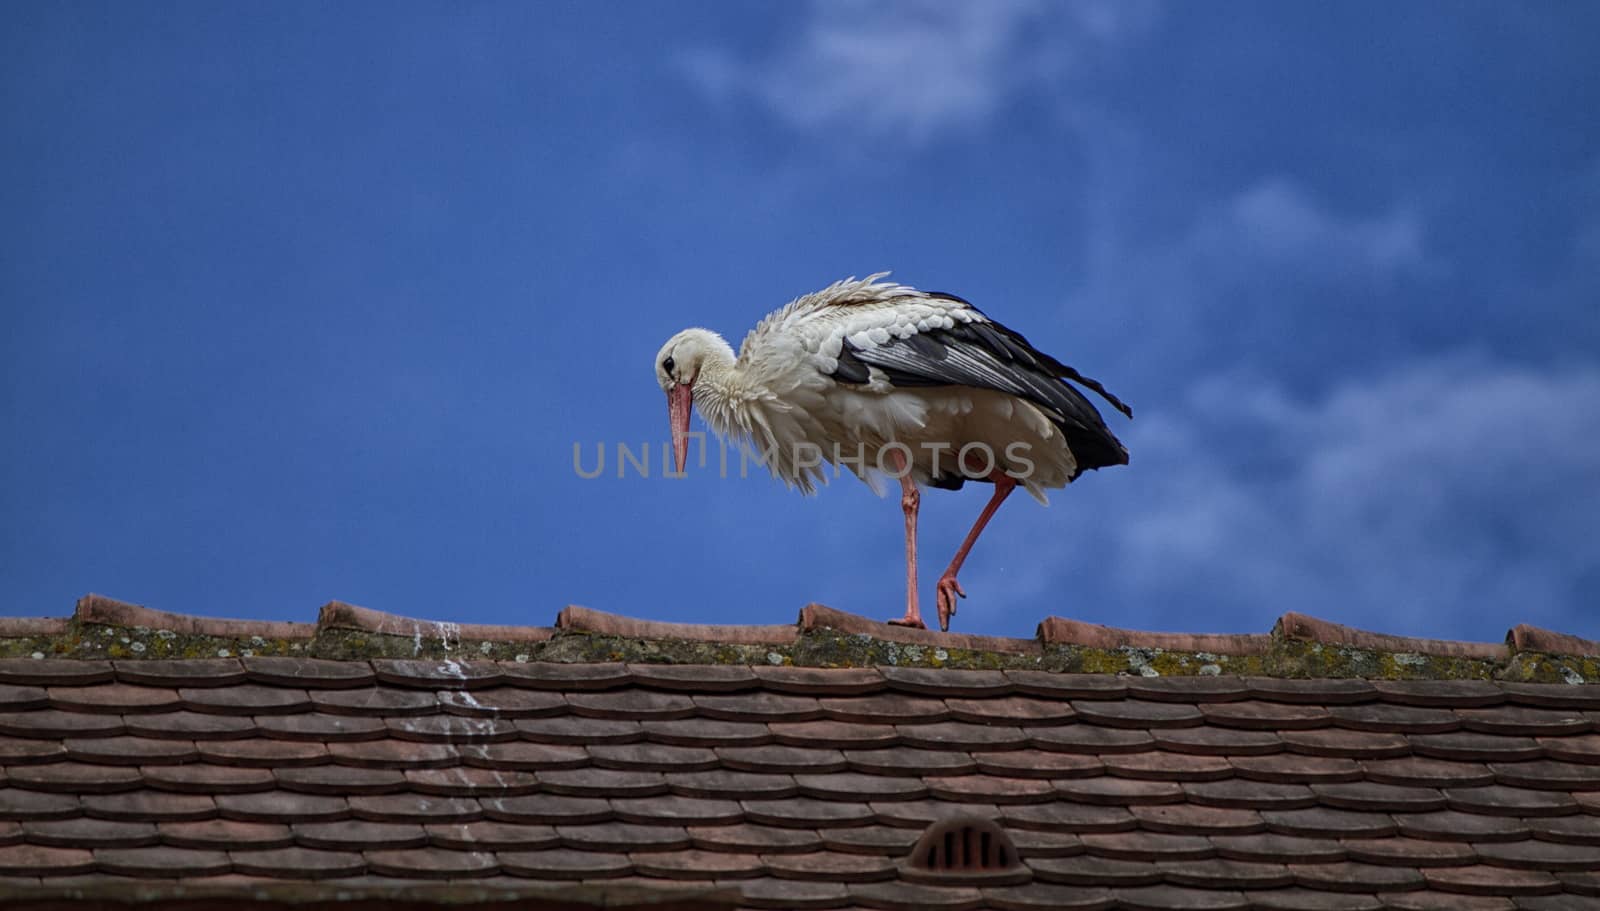 Stork walking on a roof by mariephotos